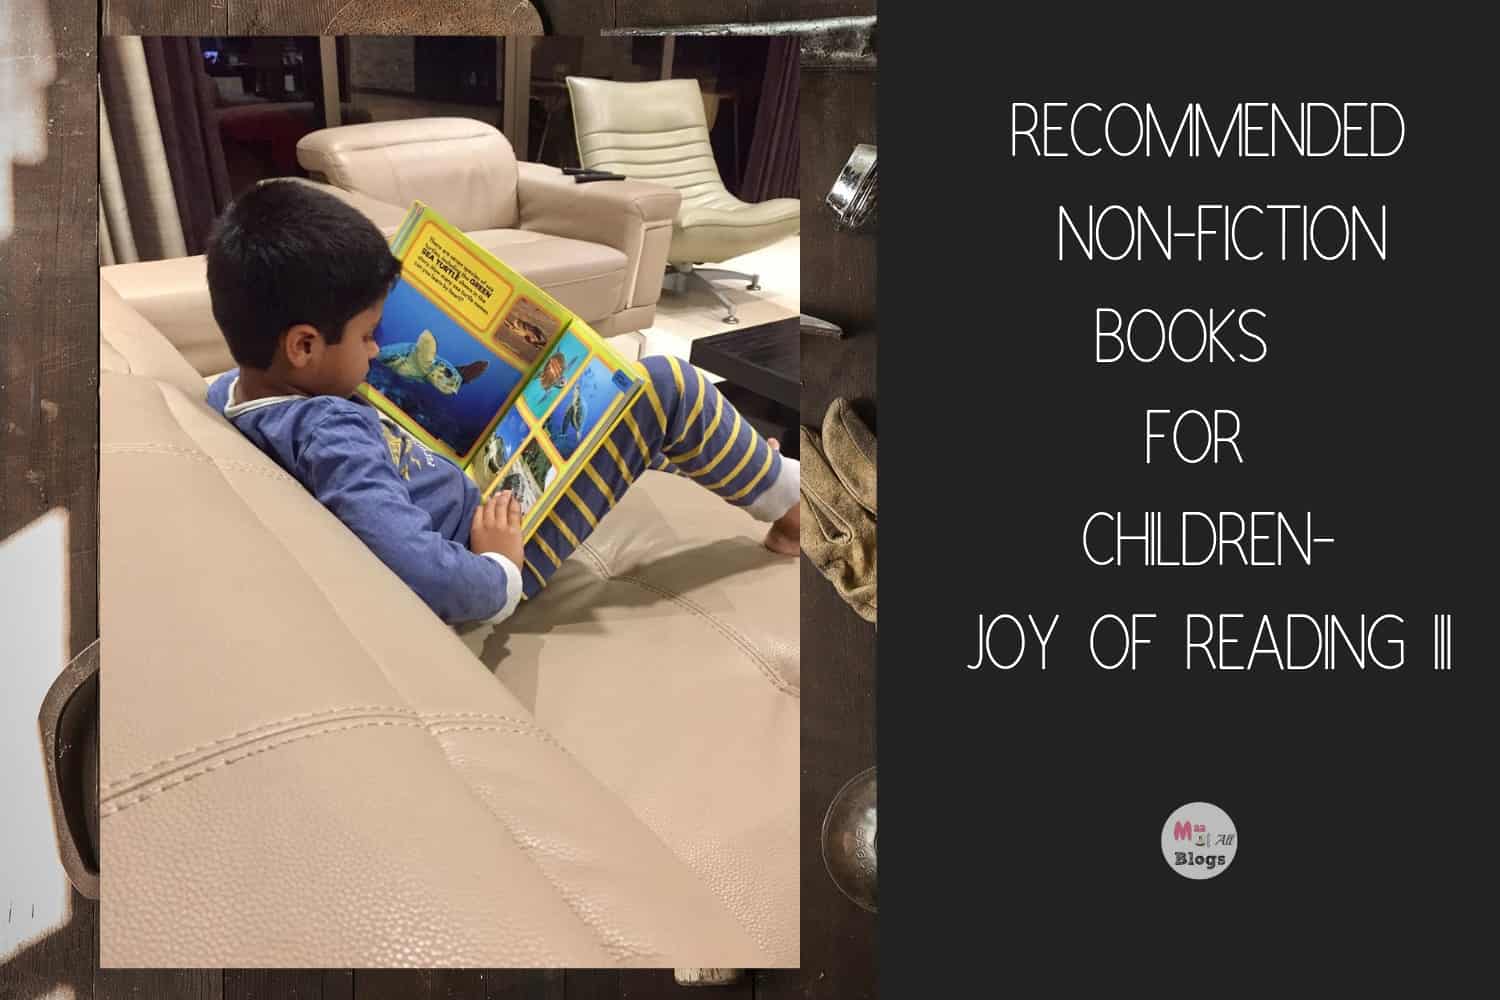 Recommended Non-Fiction Books for Children